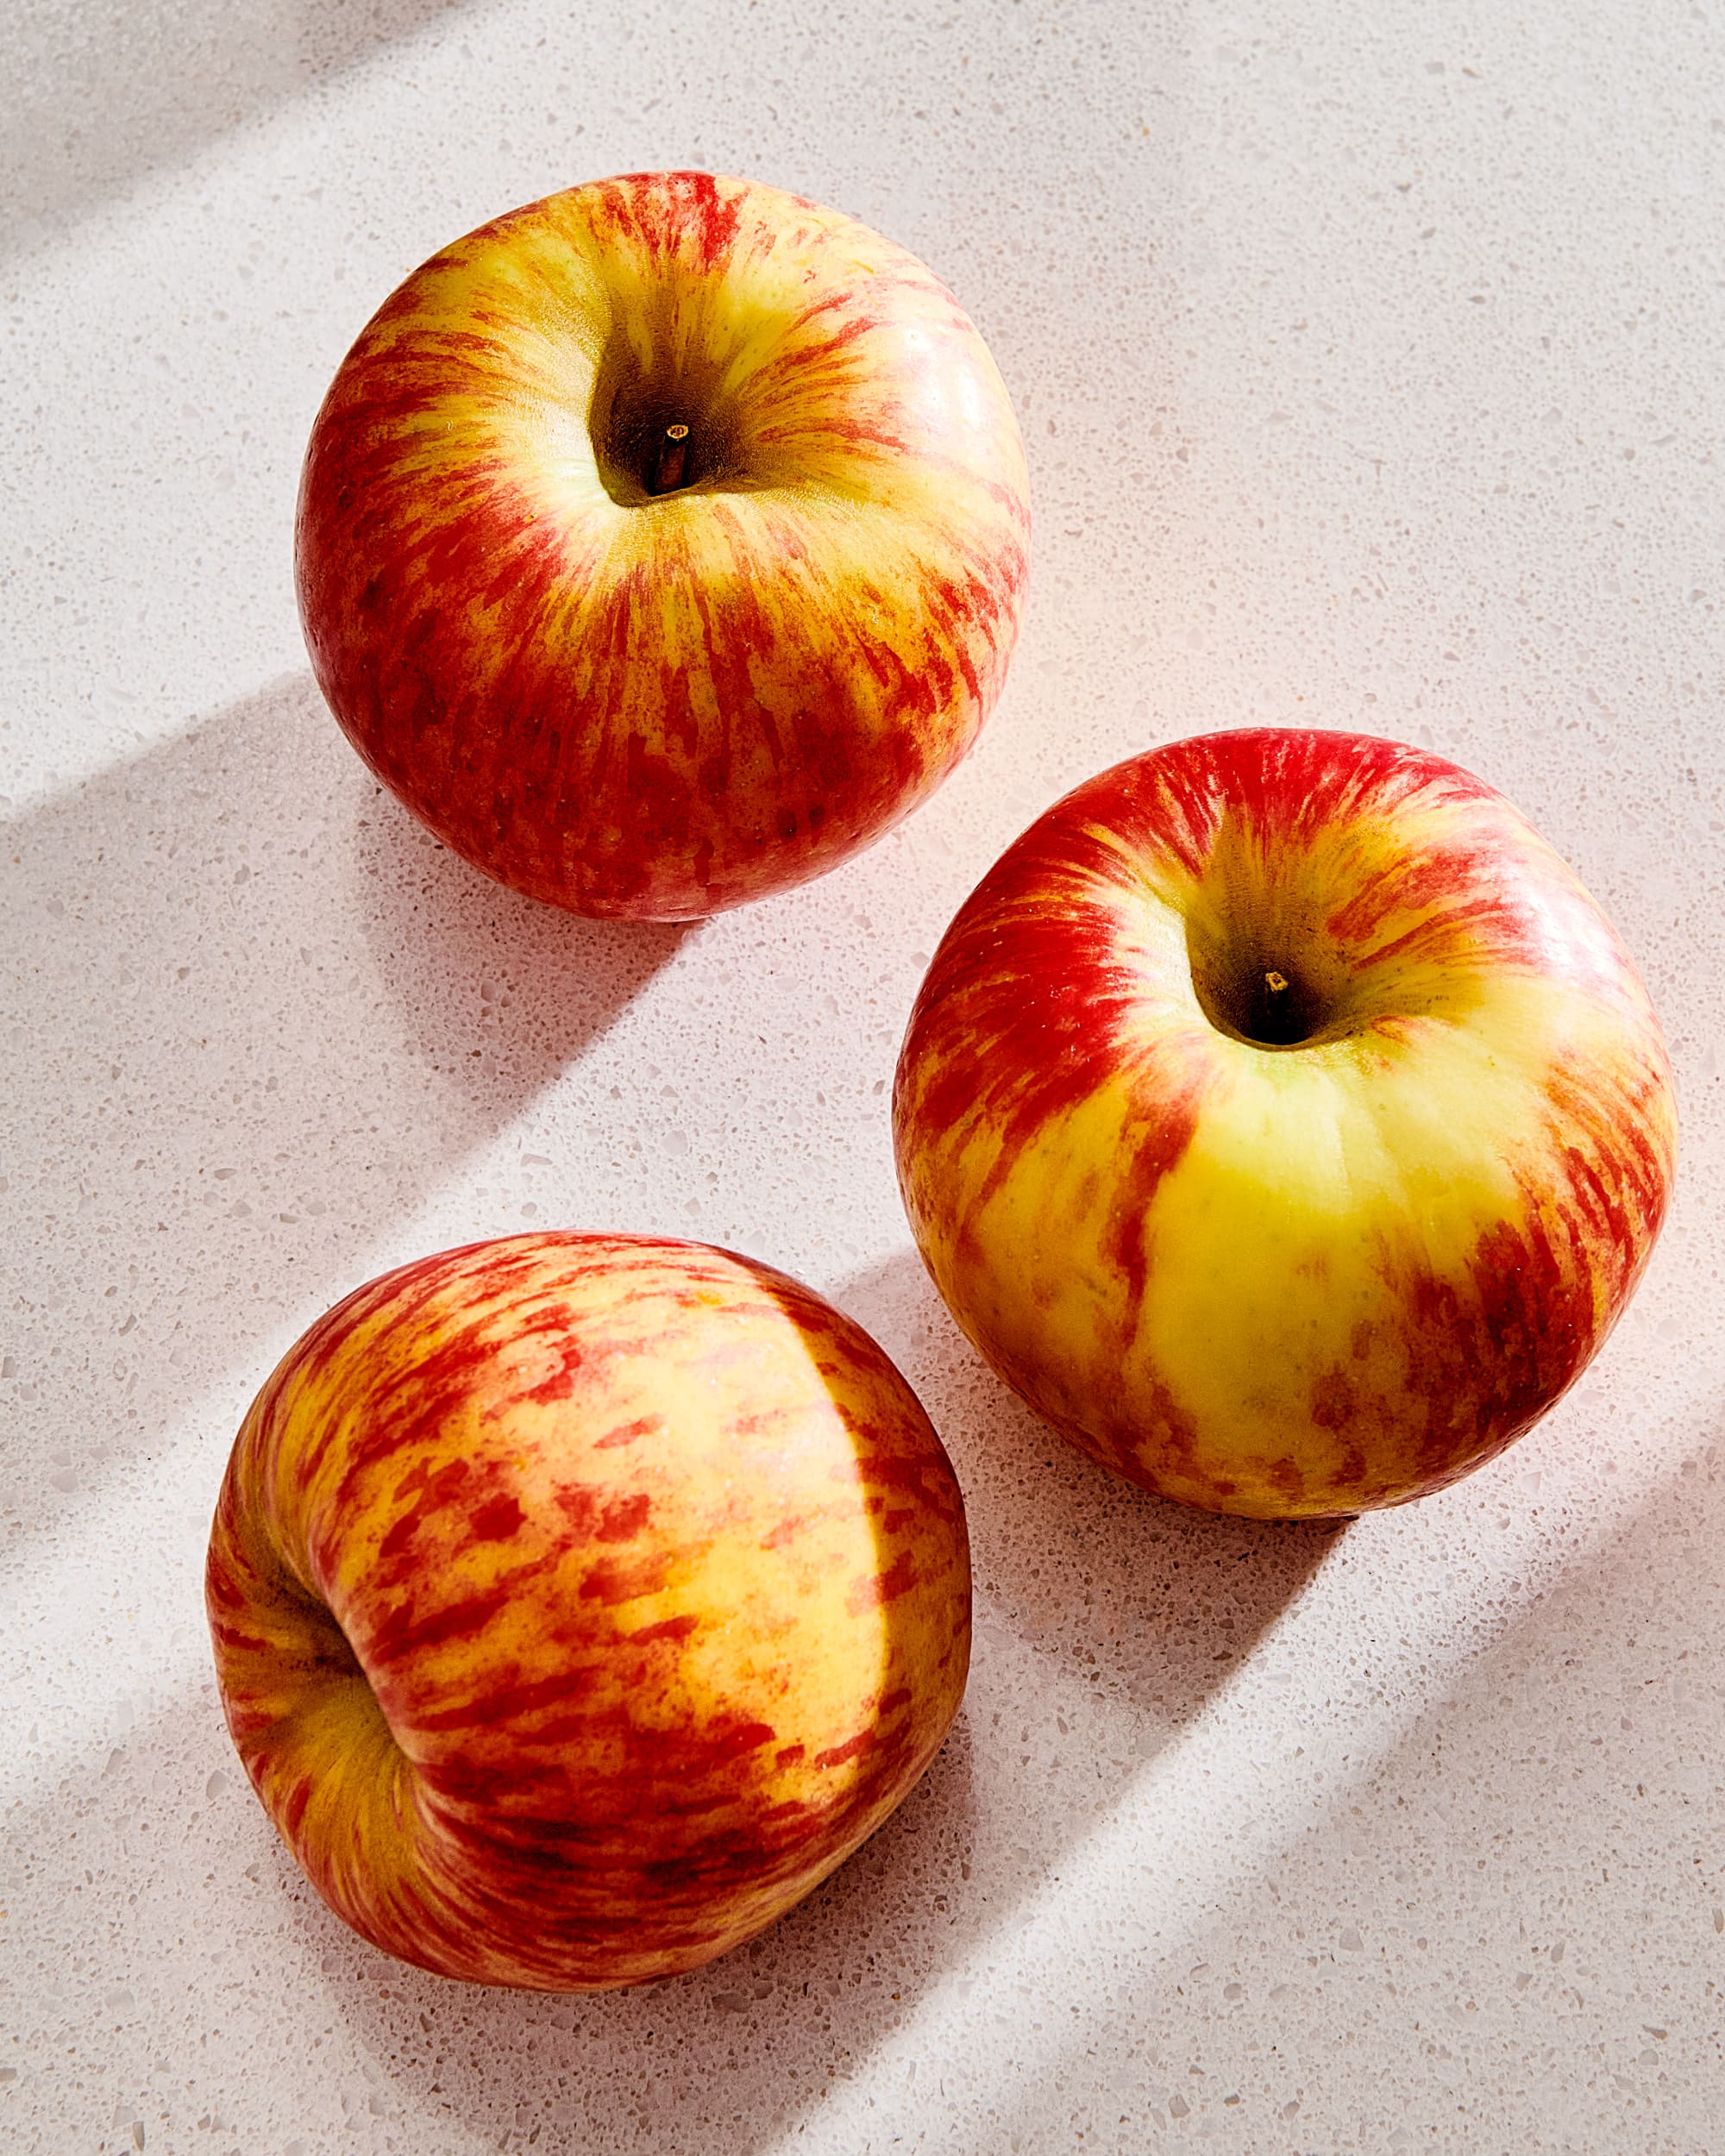 How to Store Apples So They Last Longer (The Best Way)